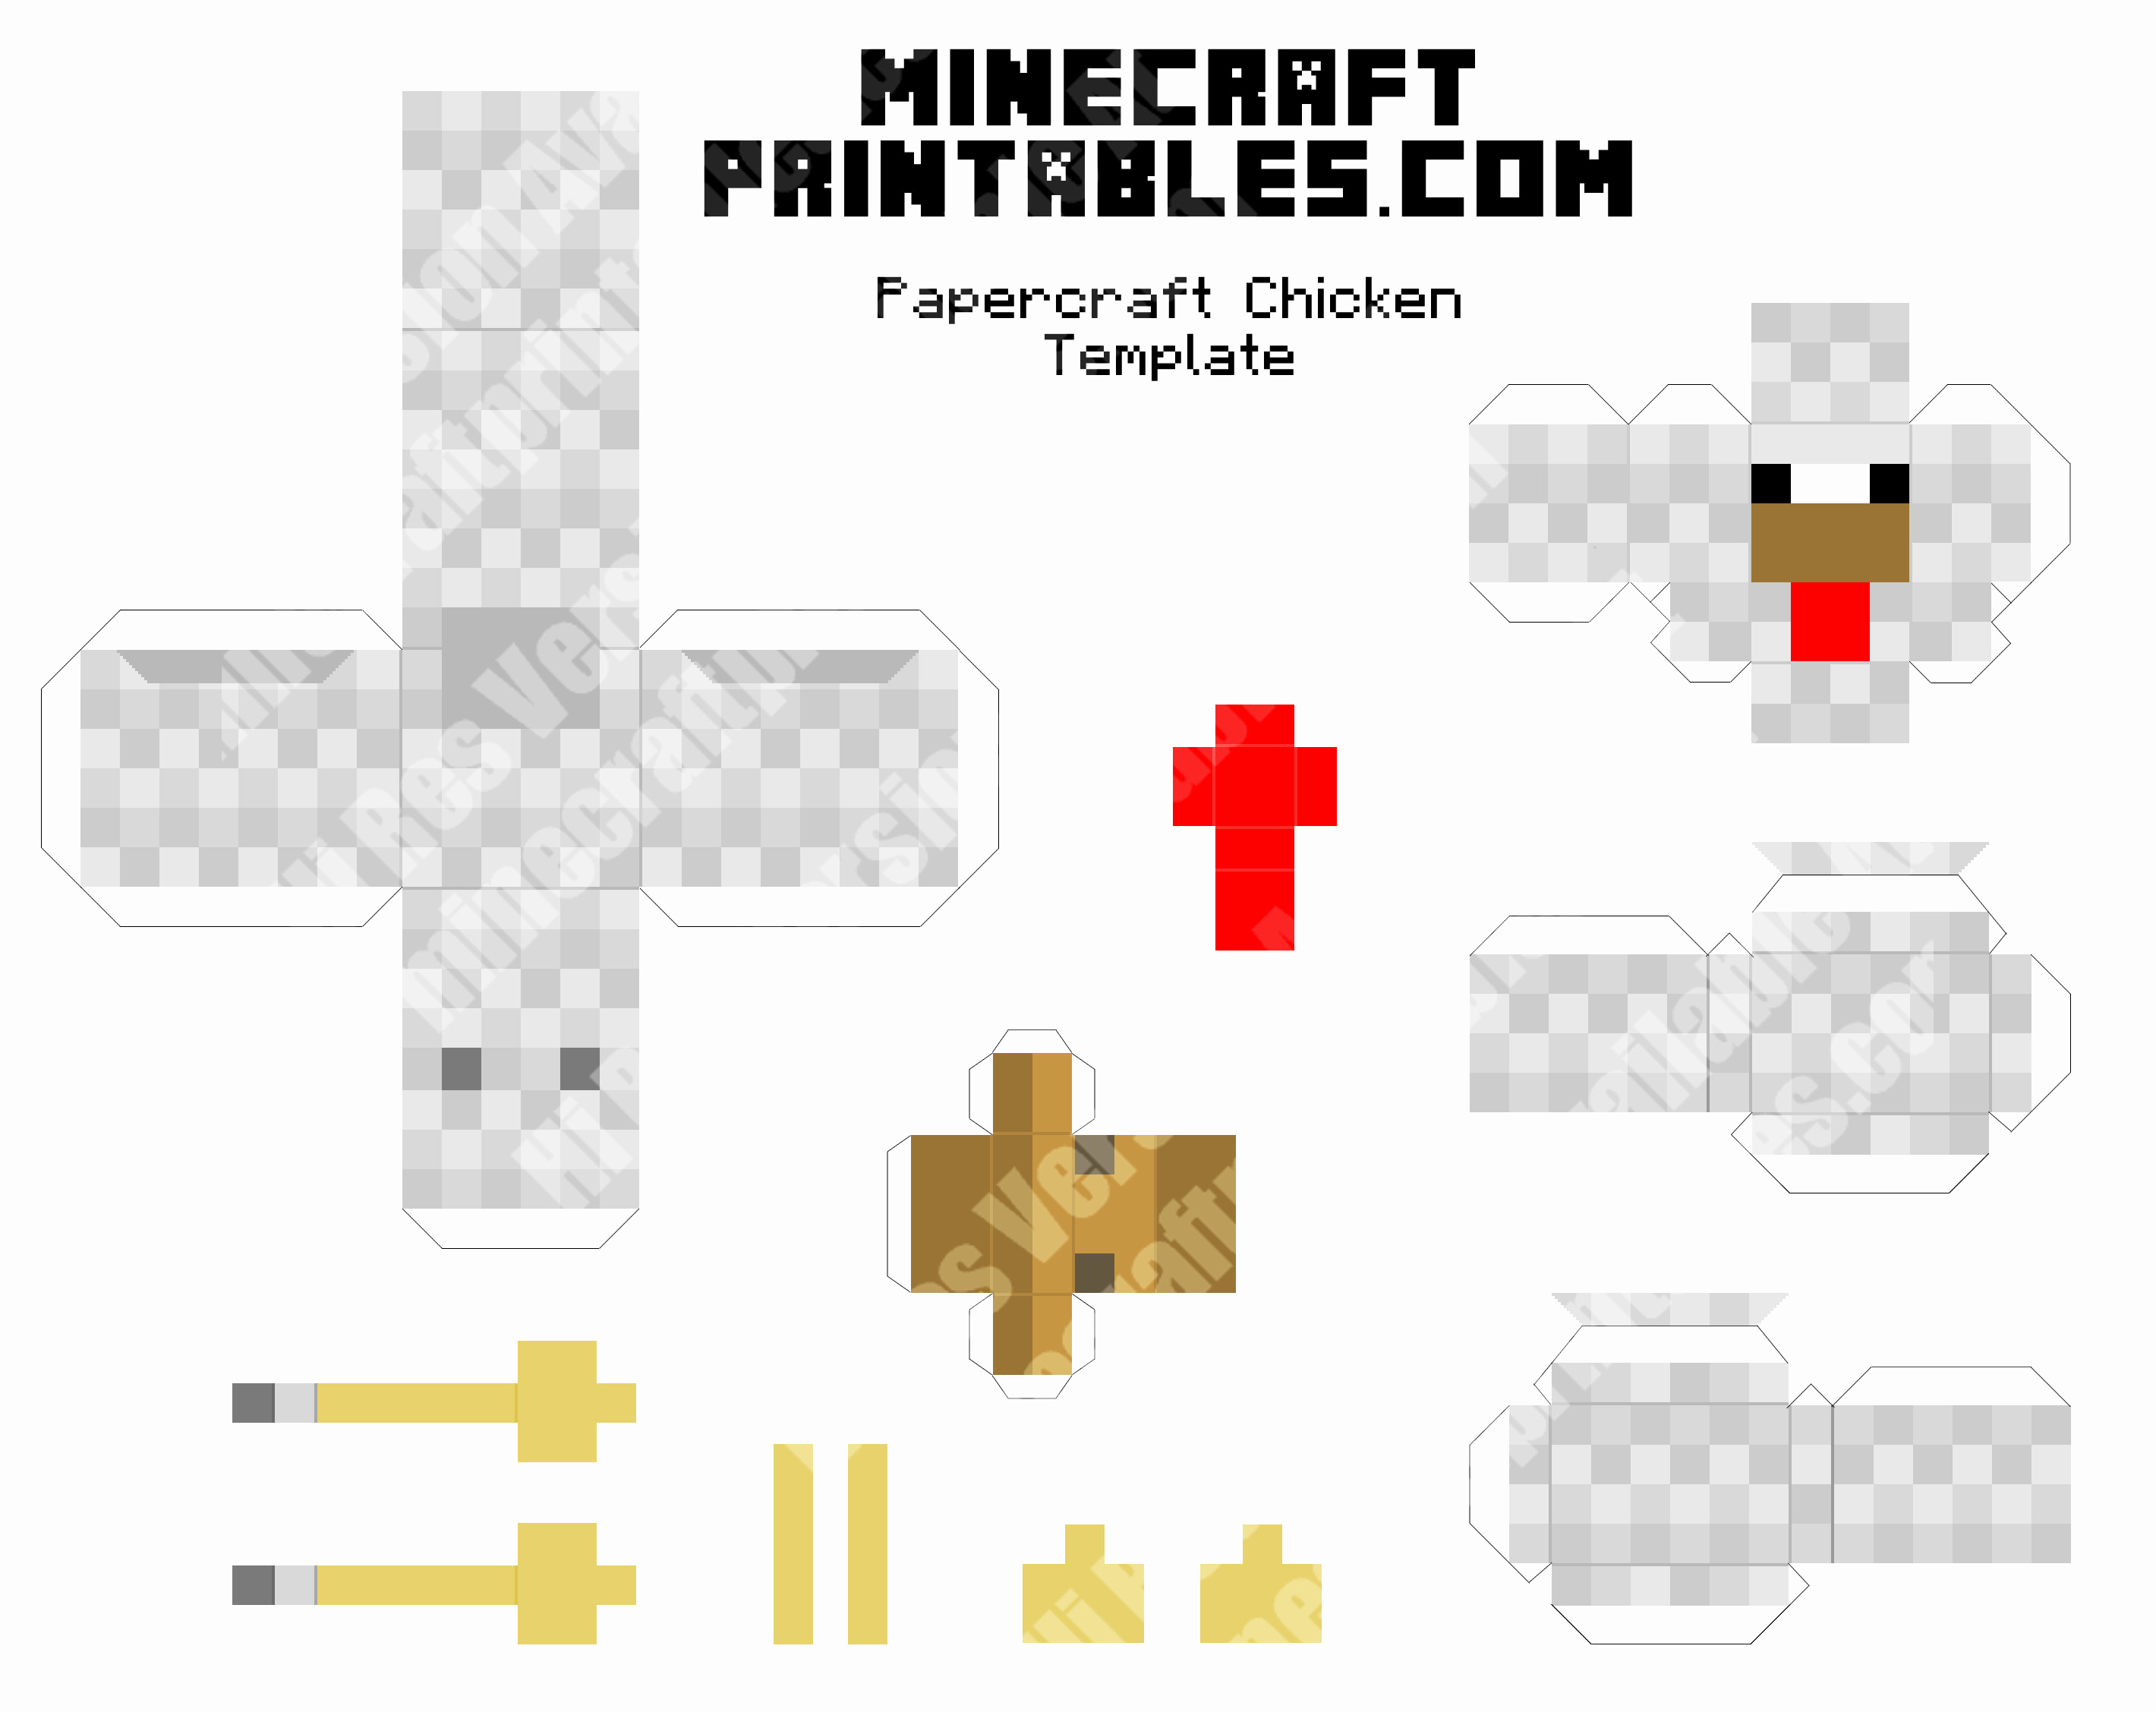 Paper Cut Outs Templates Beautiful Chicken Printable Minecraft Chicken Papercraft Template